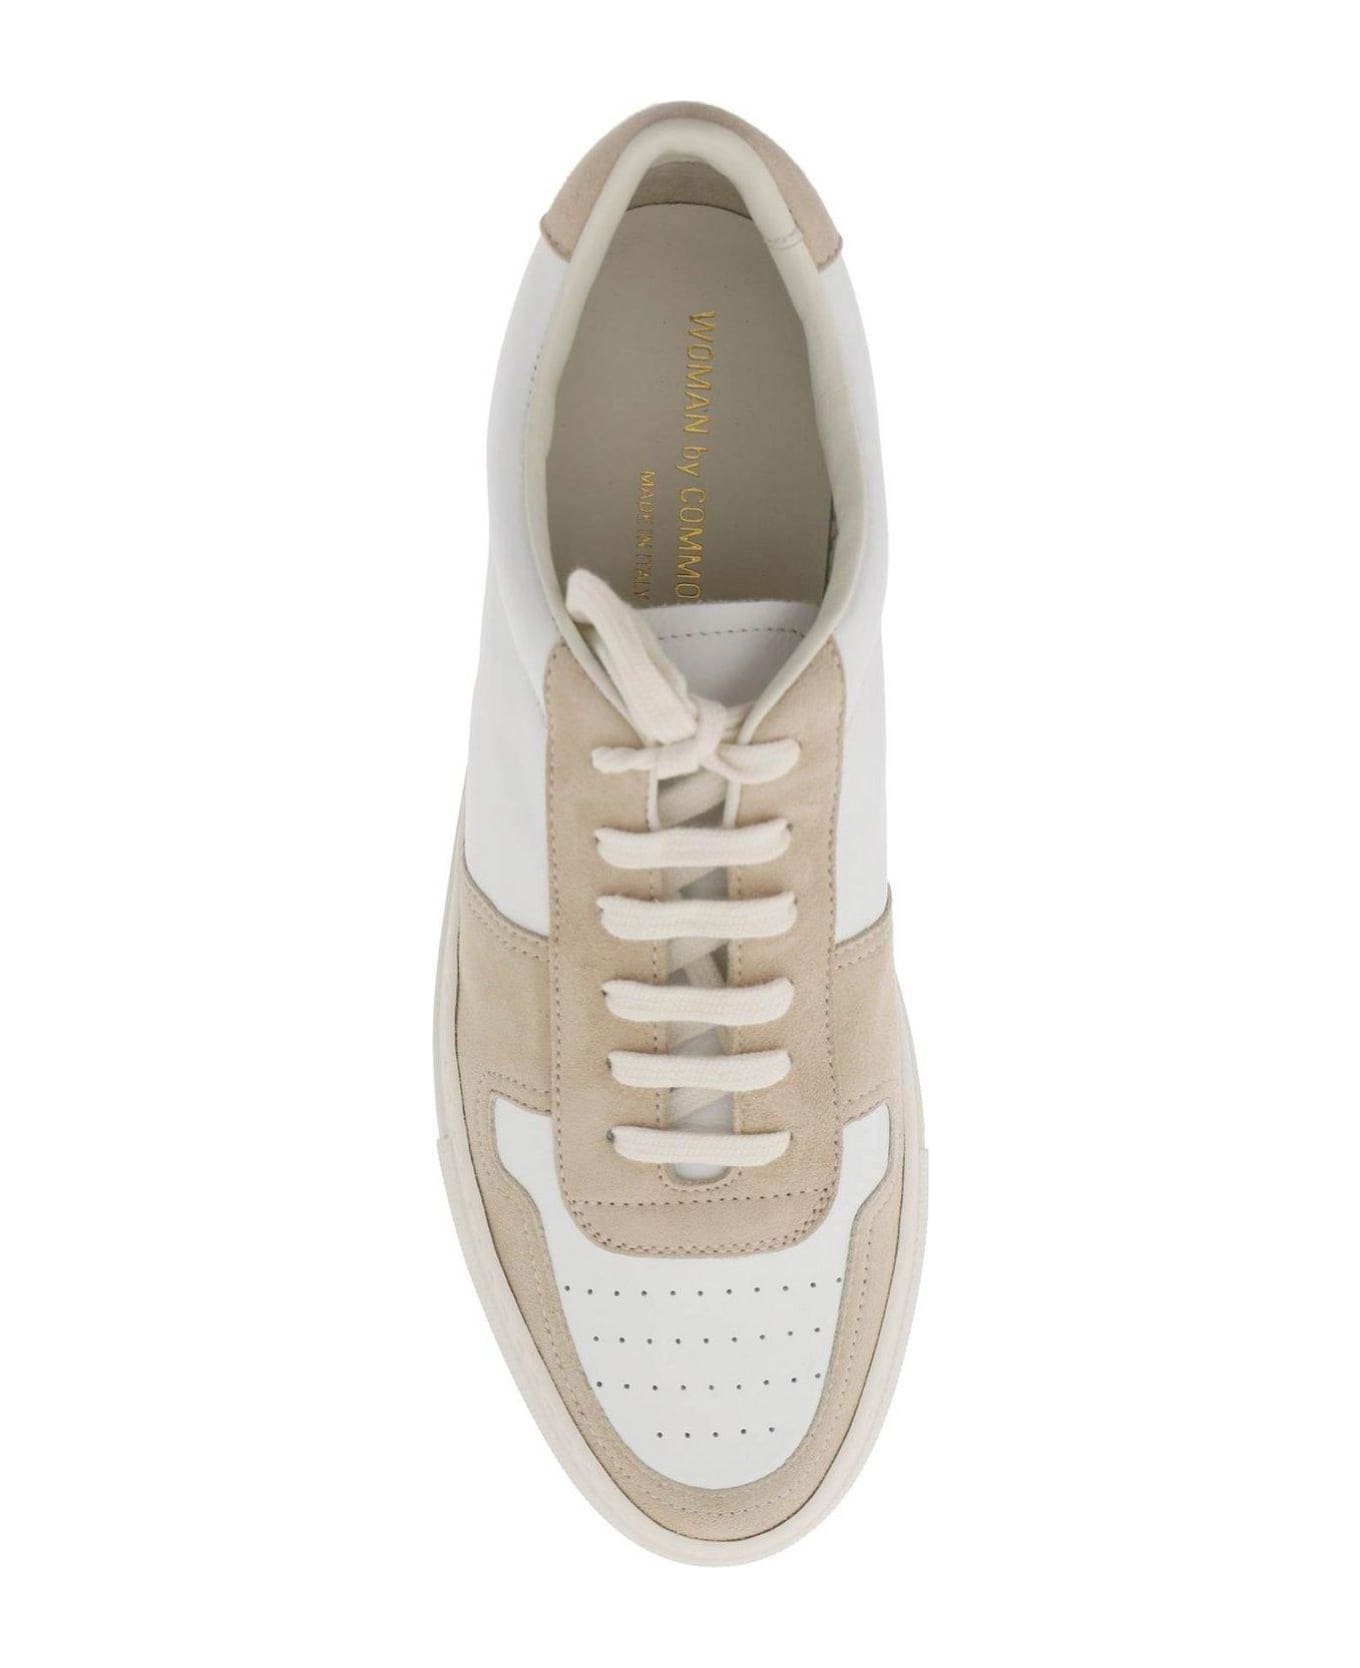 Common Projects Bball Low-top Sneakers - TAN (Beige)